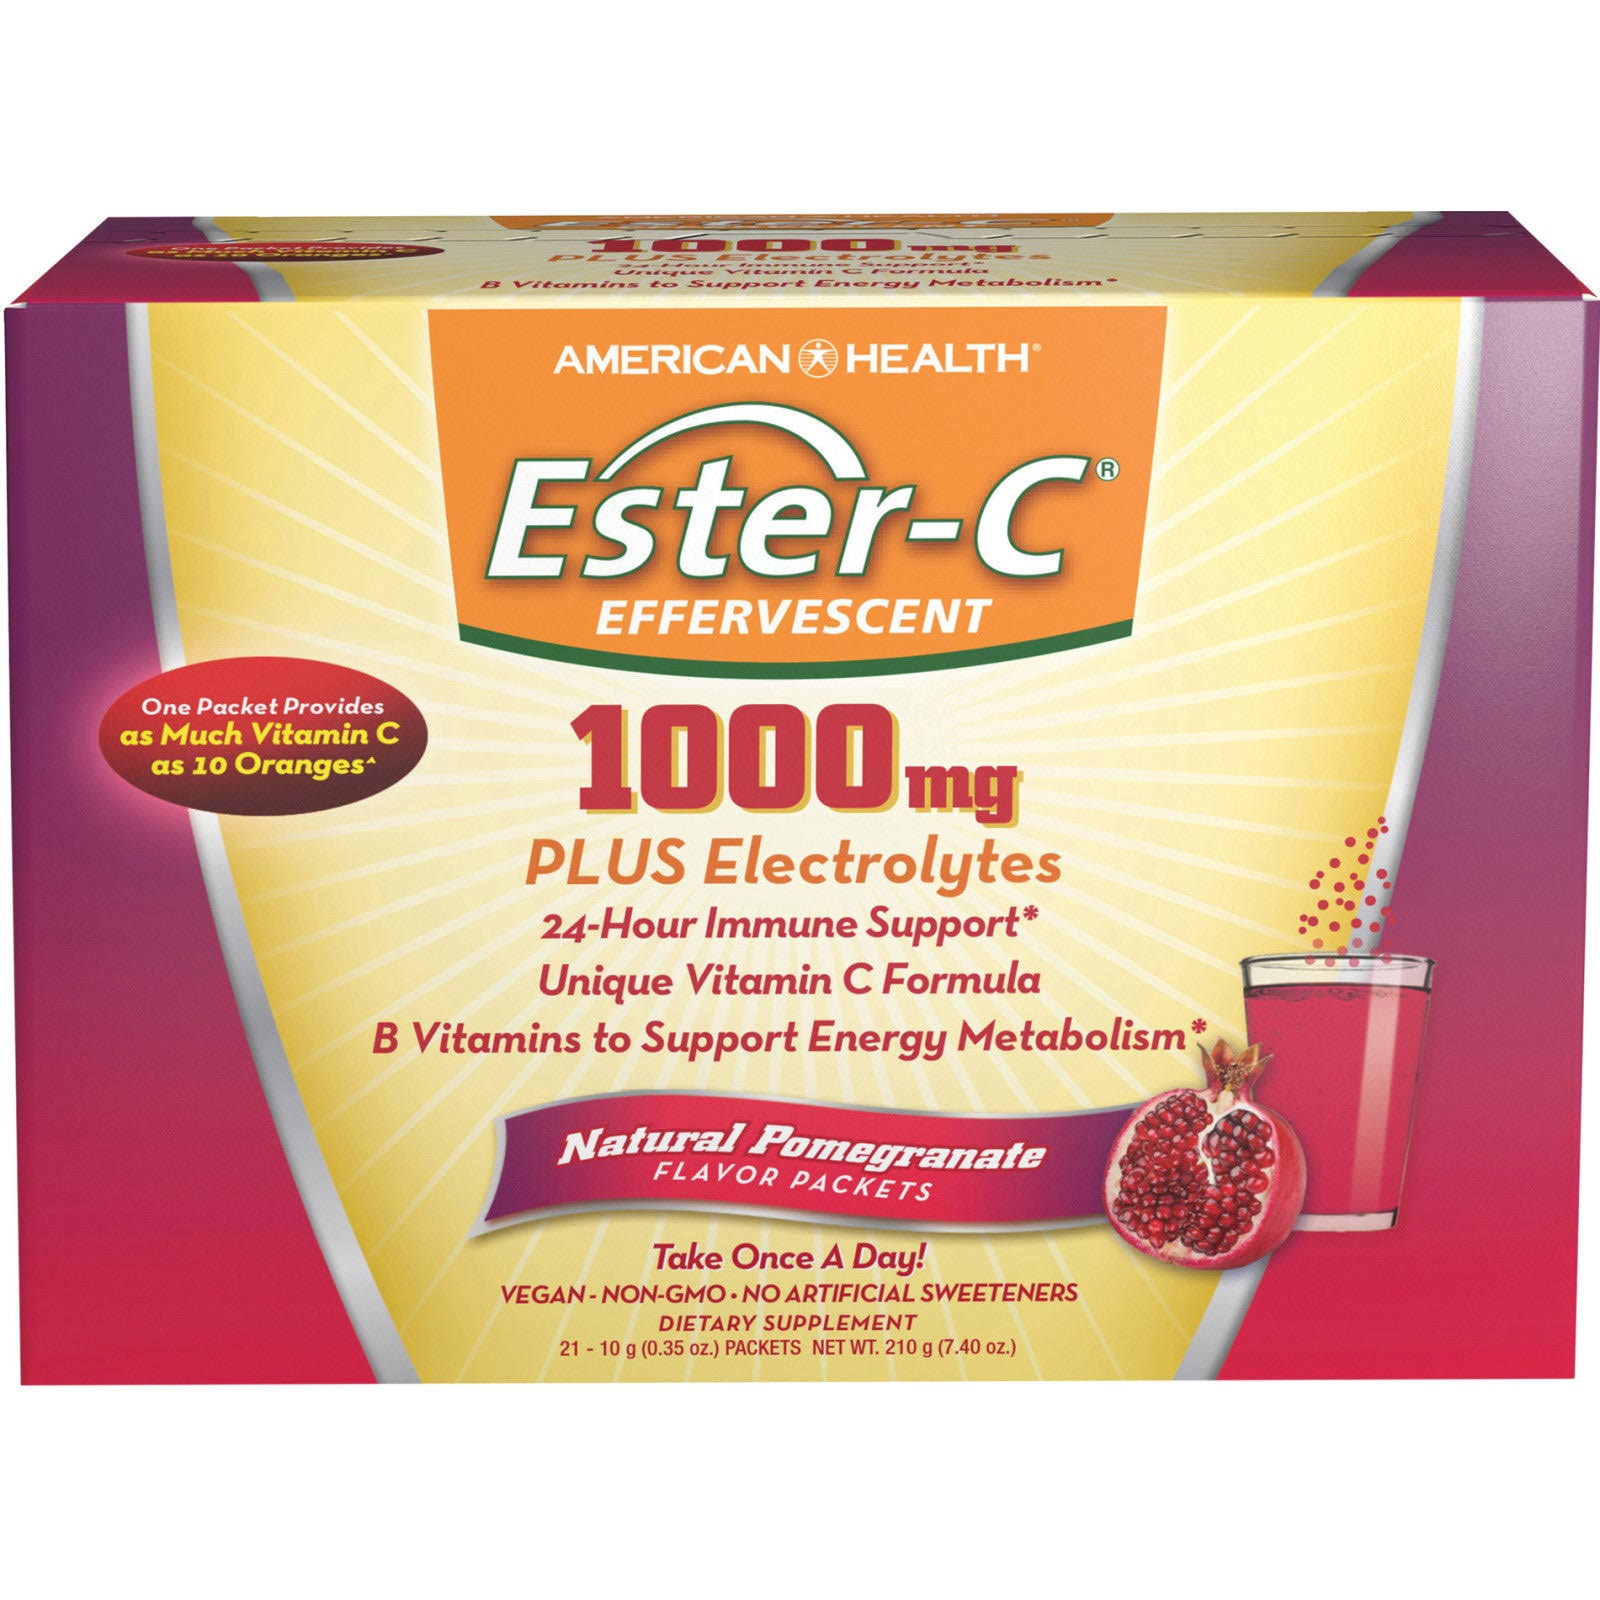 American Health Ester-C 1000 MG Effervescent 21 Packets Pomegranate